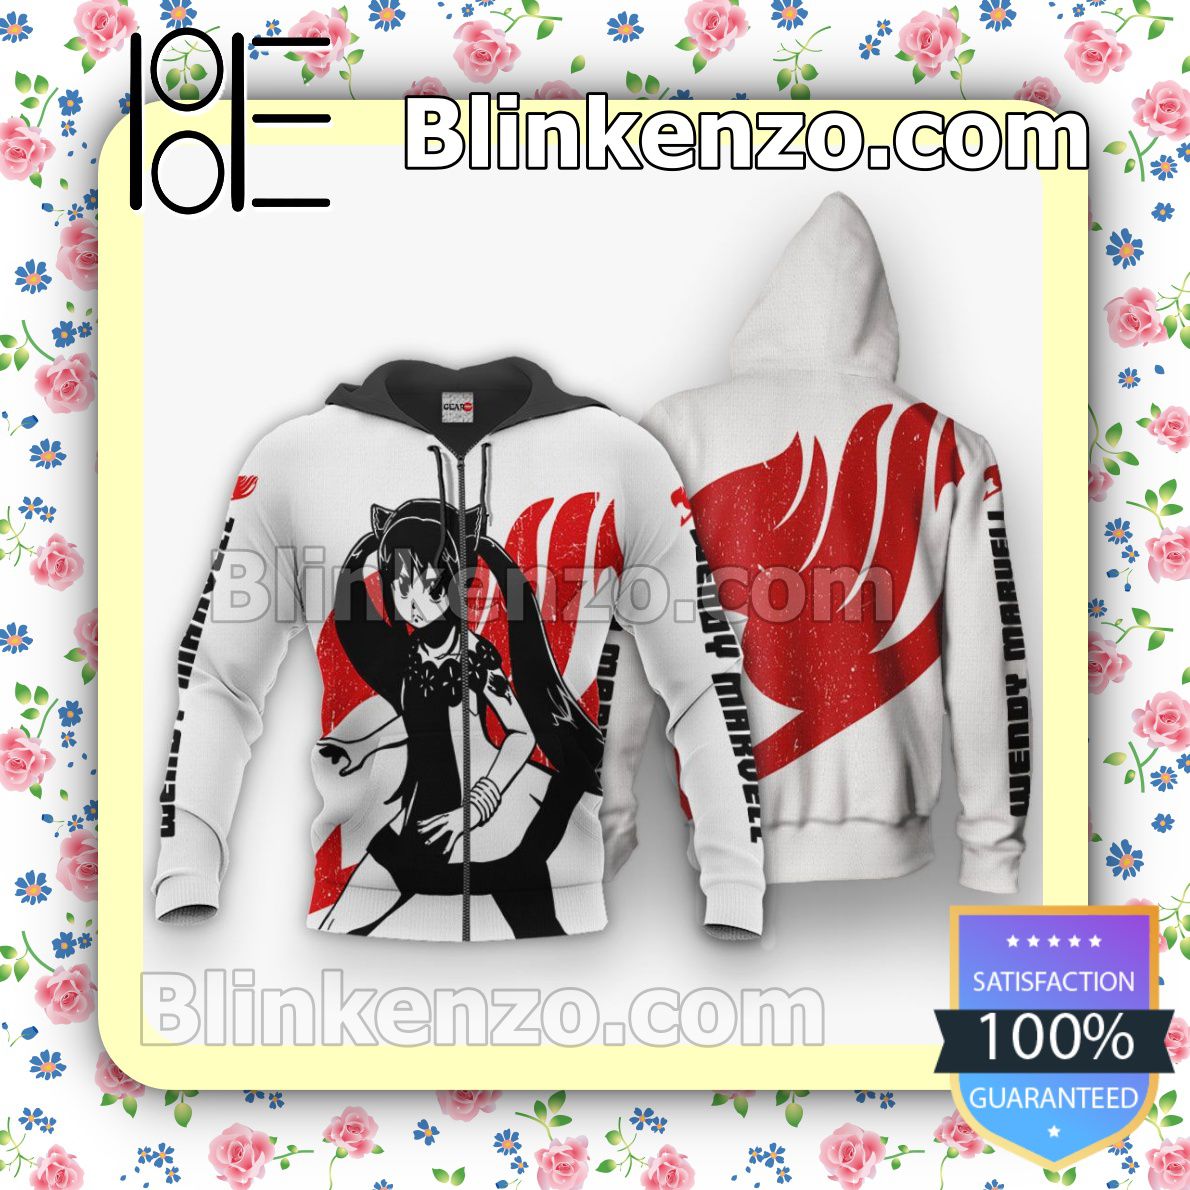 Fairy Tail Wendy Marvell Silhouette Anime Personalized T-shirt, Hoodie, Long Sleeve, Bomber Jacket